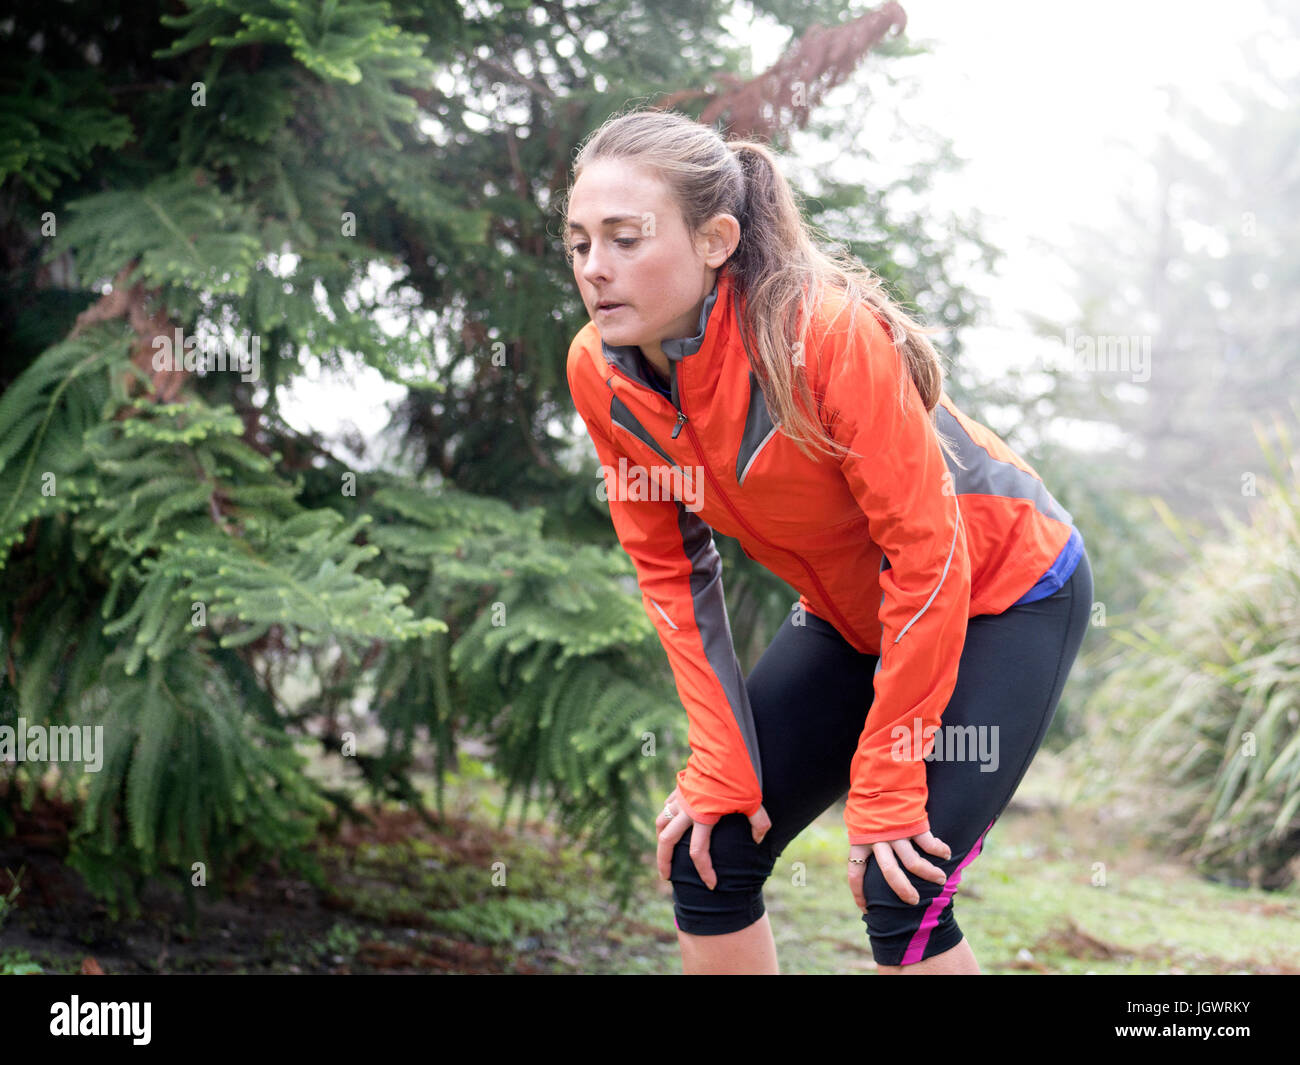 Exhausted female runner bending forward with hands on knees in park Stock Photo